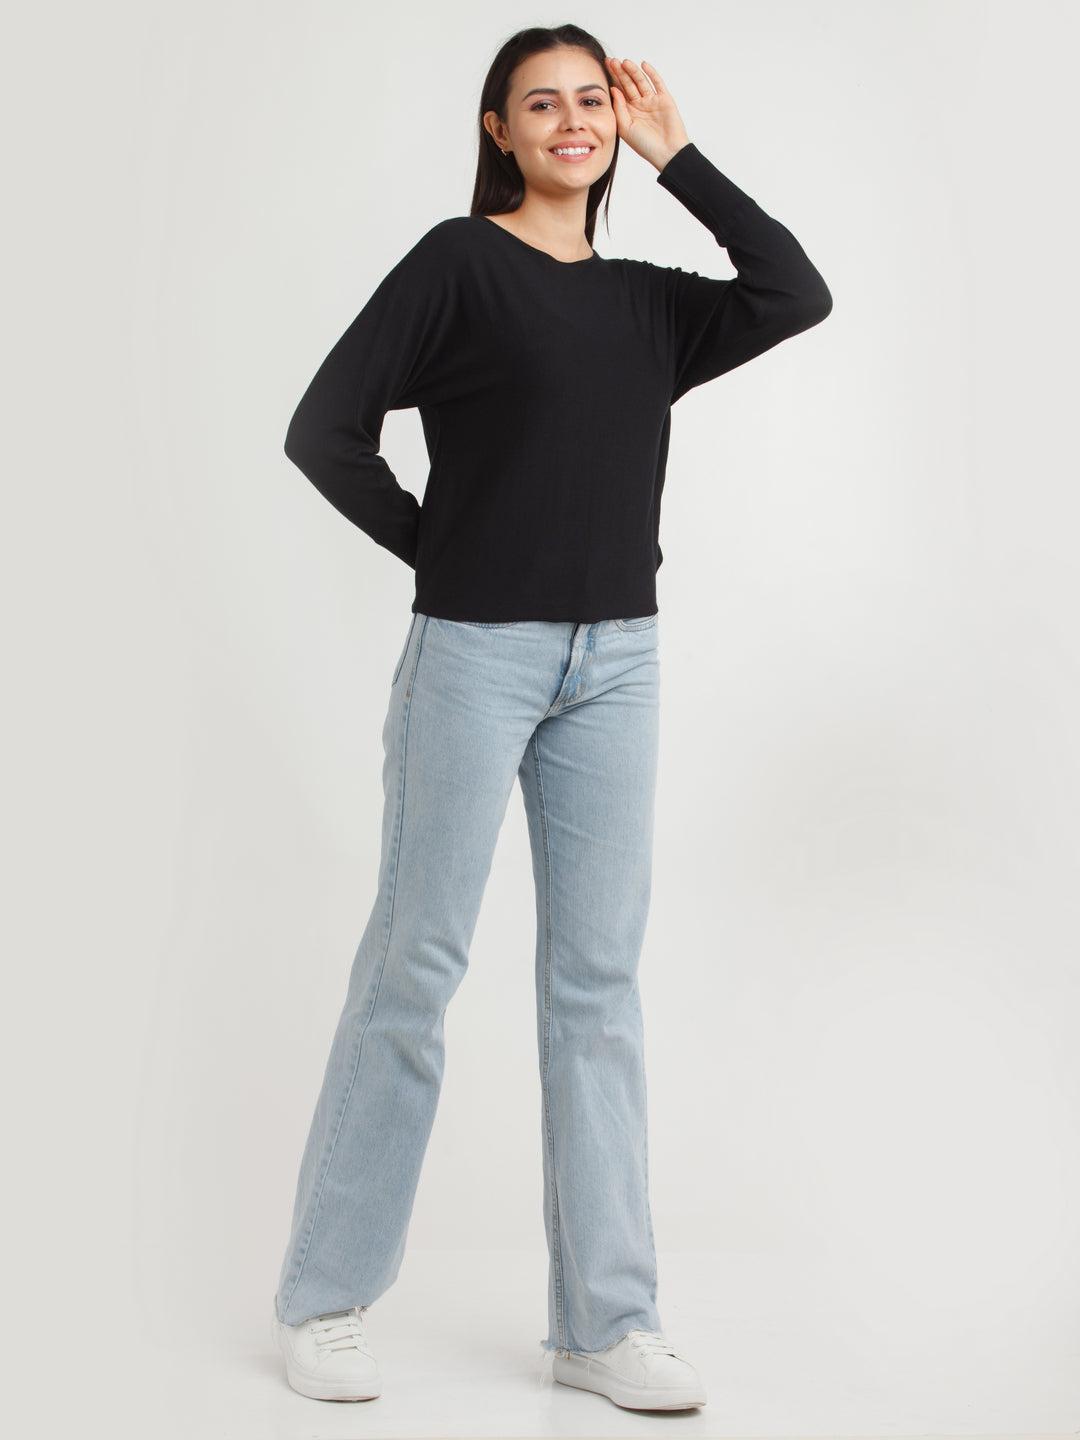 Black Solid Sweater For Women By Zink London 